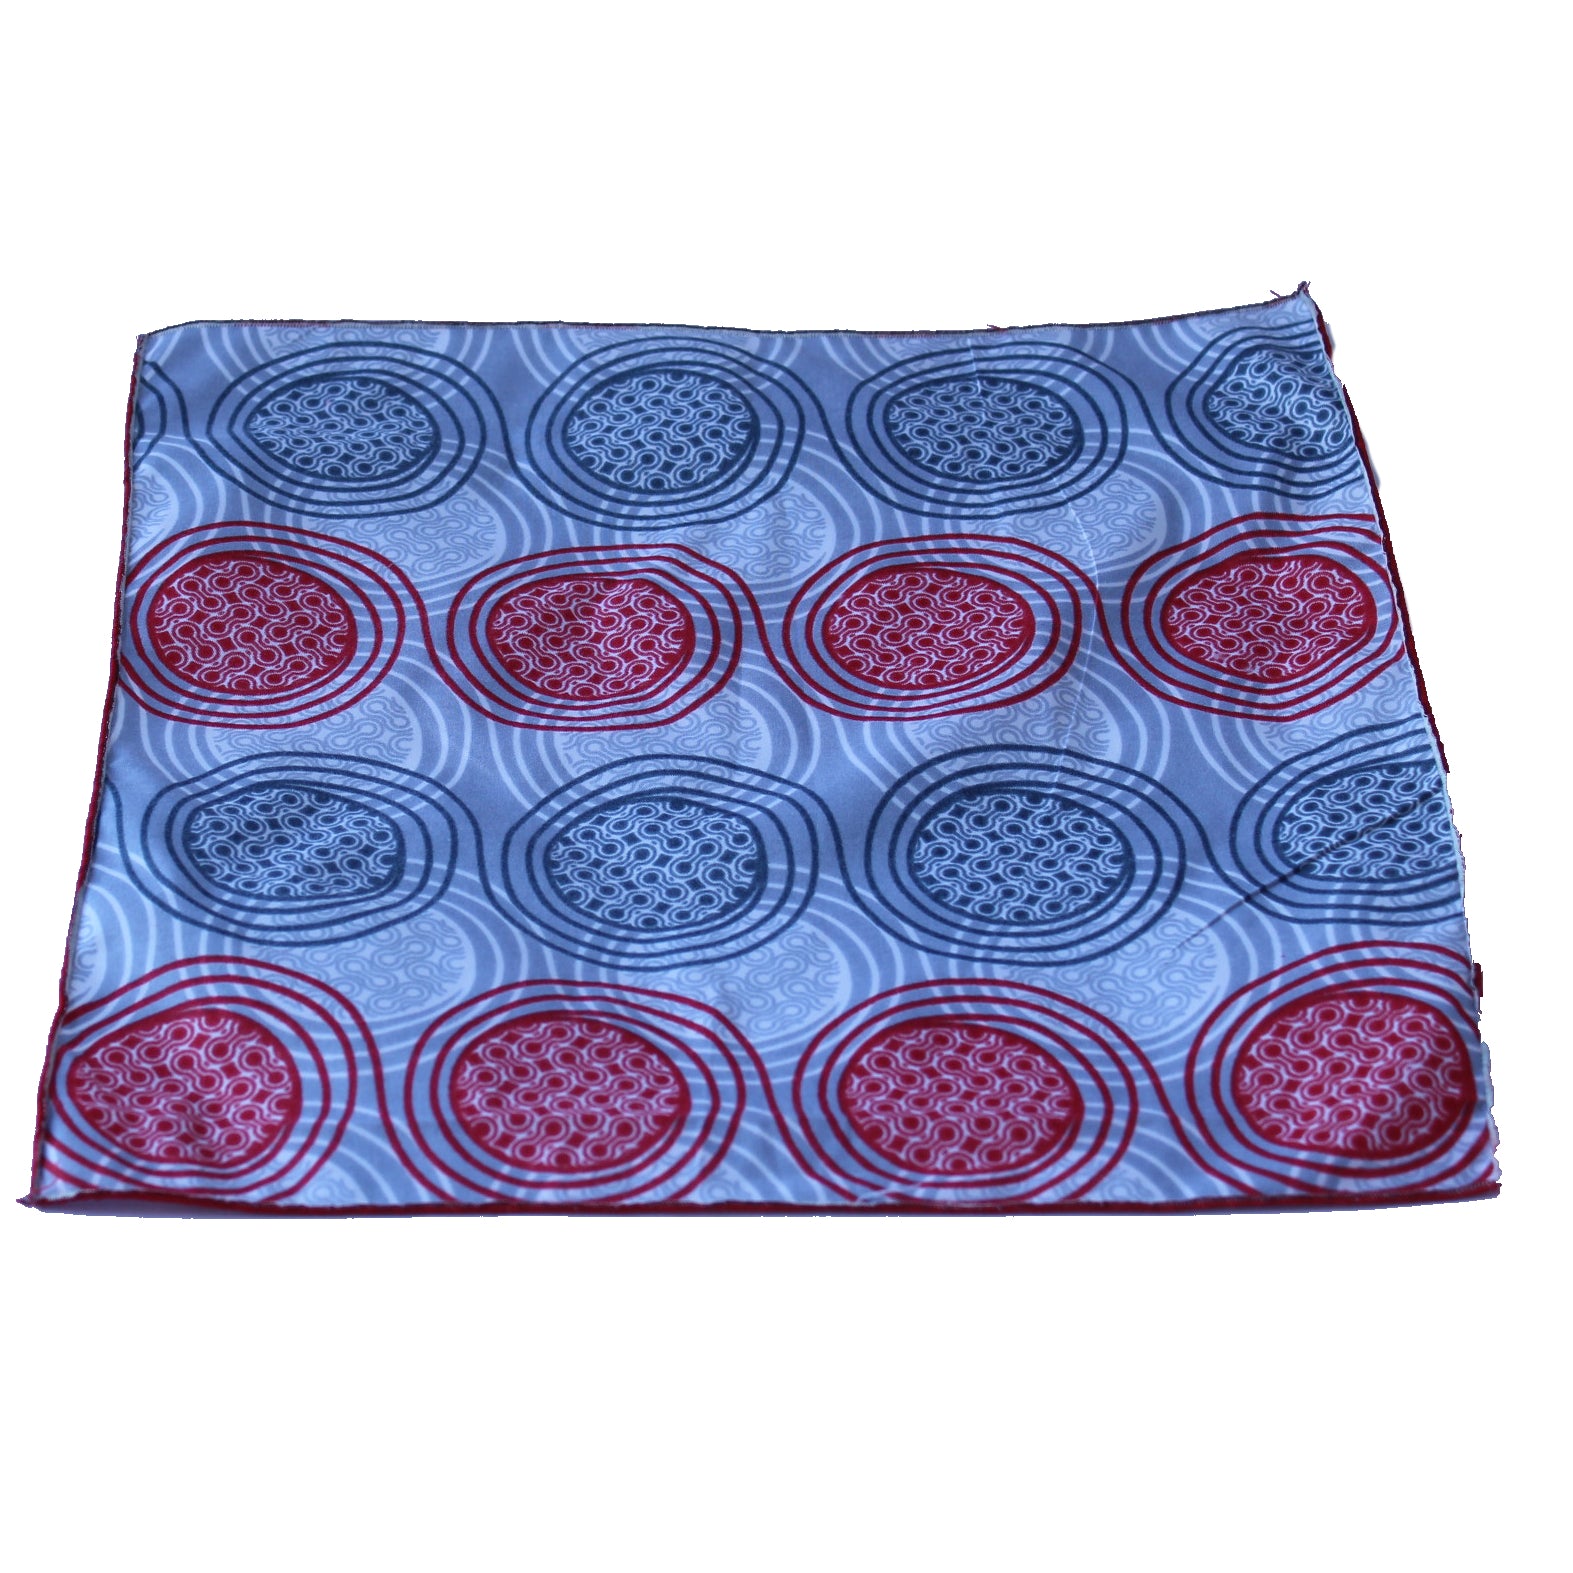 Pocket Square African Print Contemporary and Colorful Ensemble-African apparel and accessories